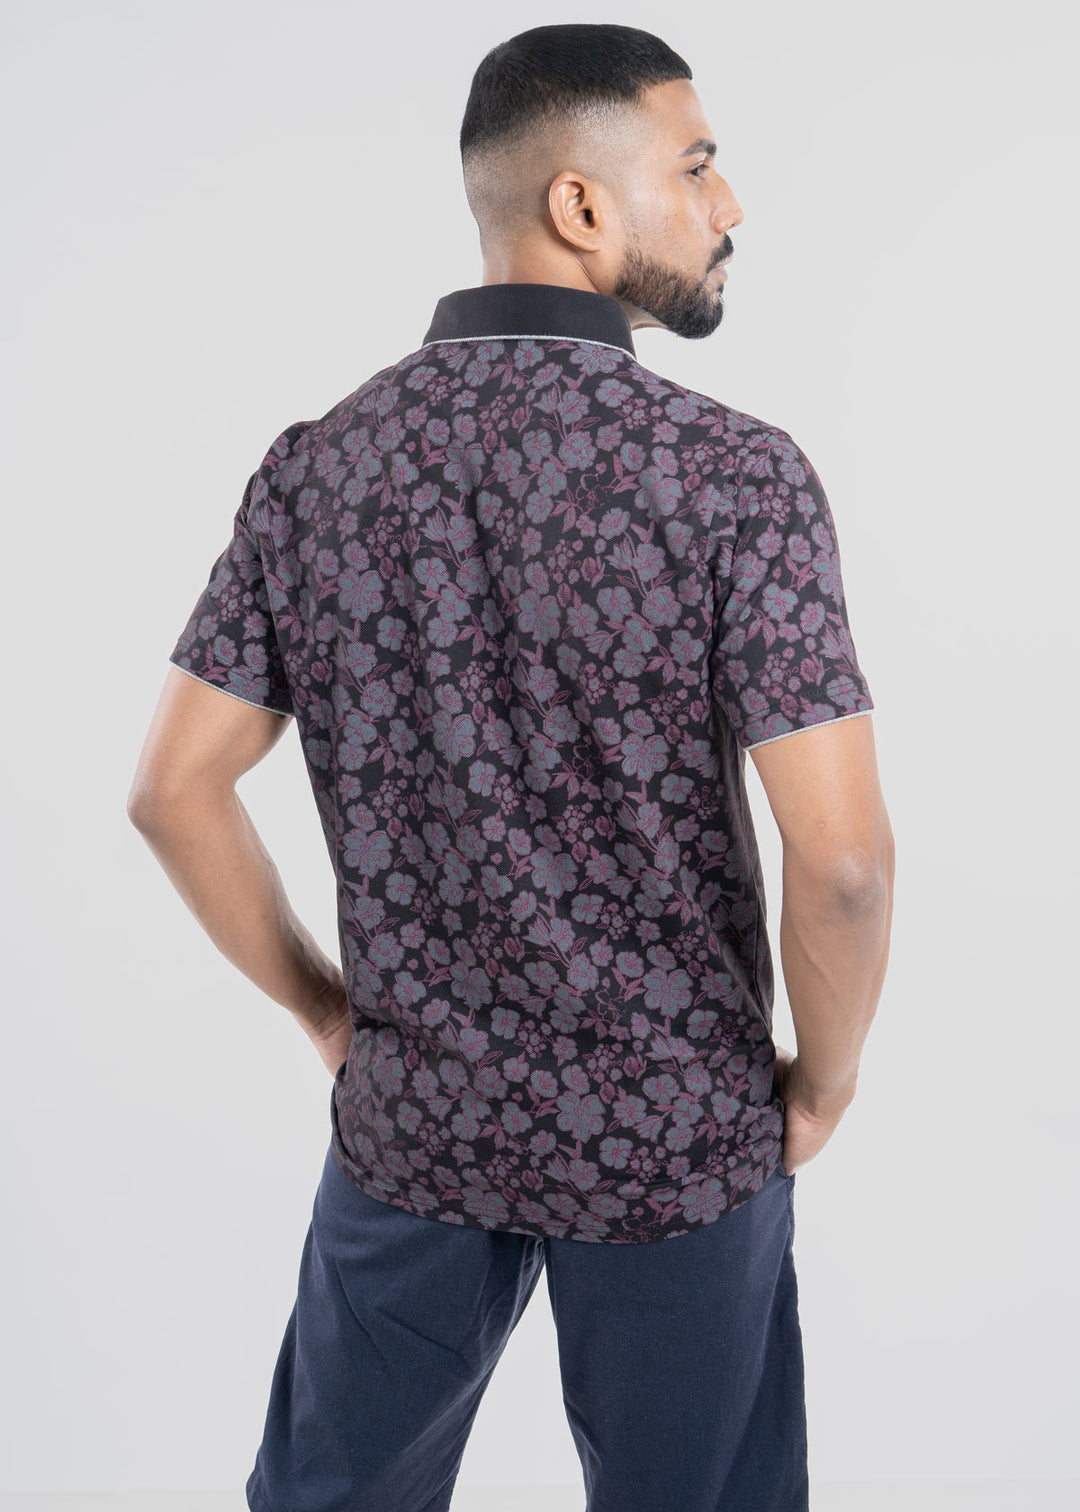 LCY | Abstract Floral AOP Polo LCY